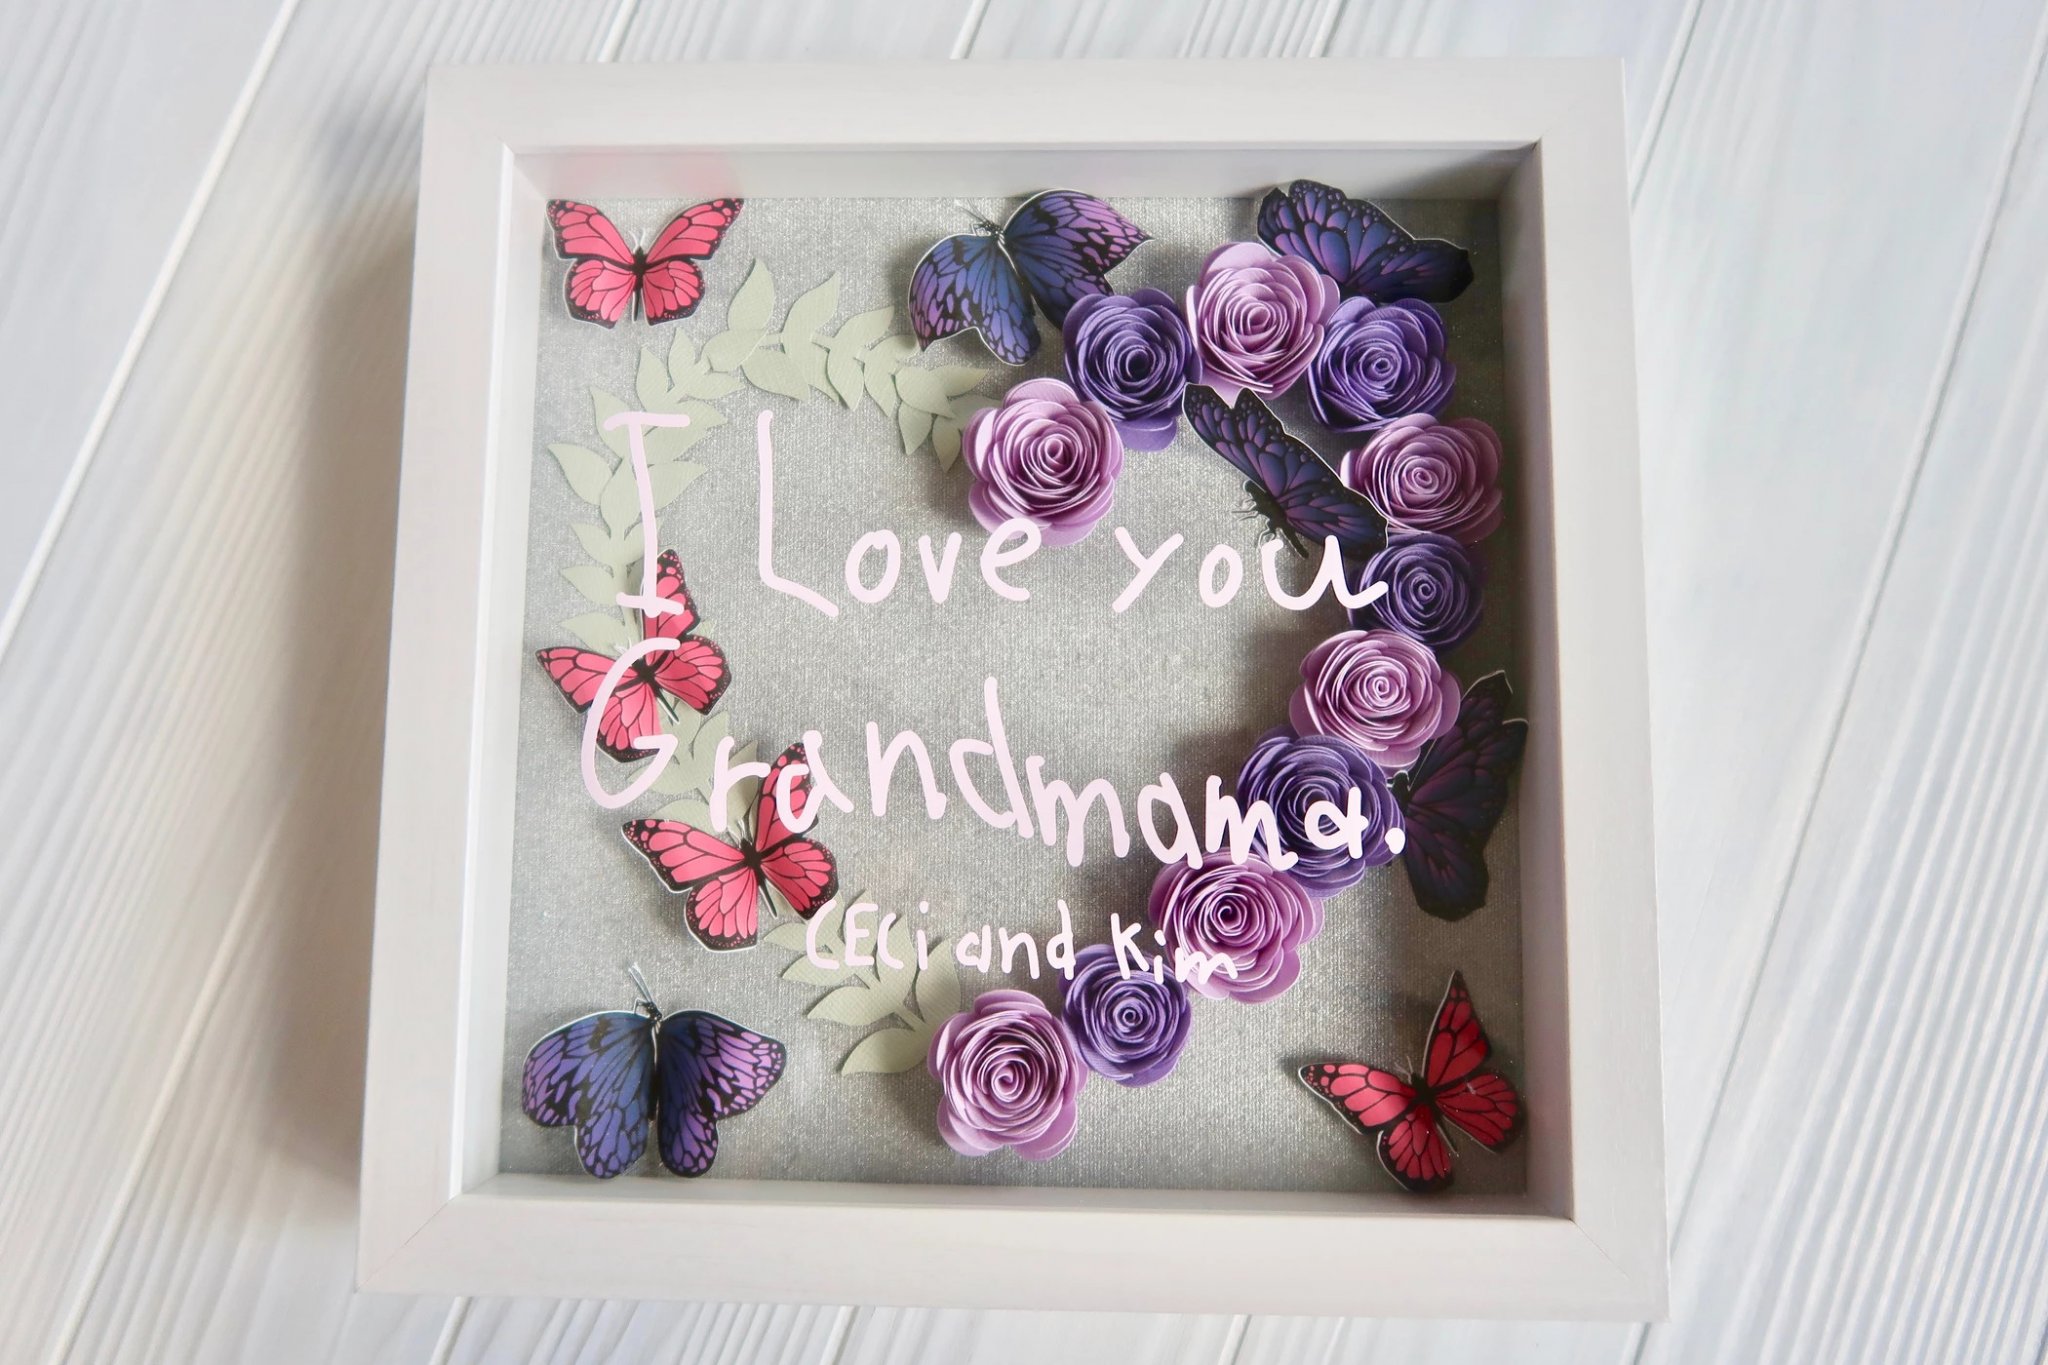 20 Stunning Examples Of Diy Shadow Boxes To Inspire You